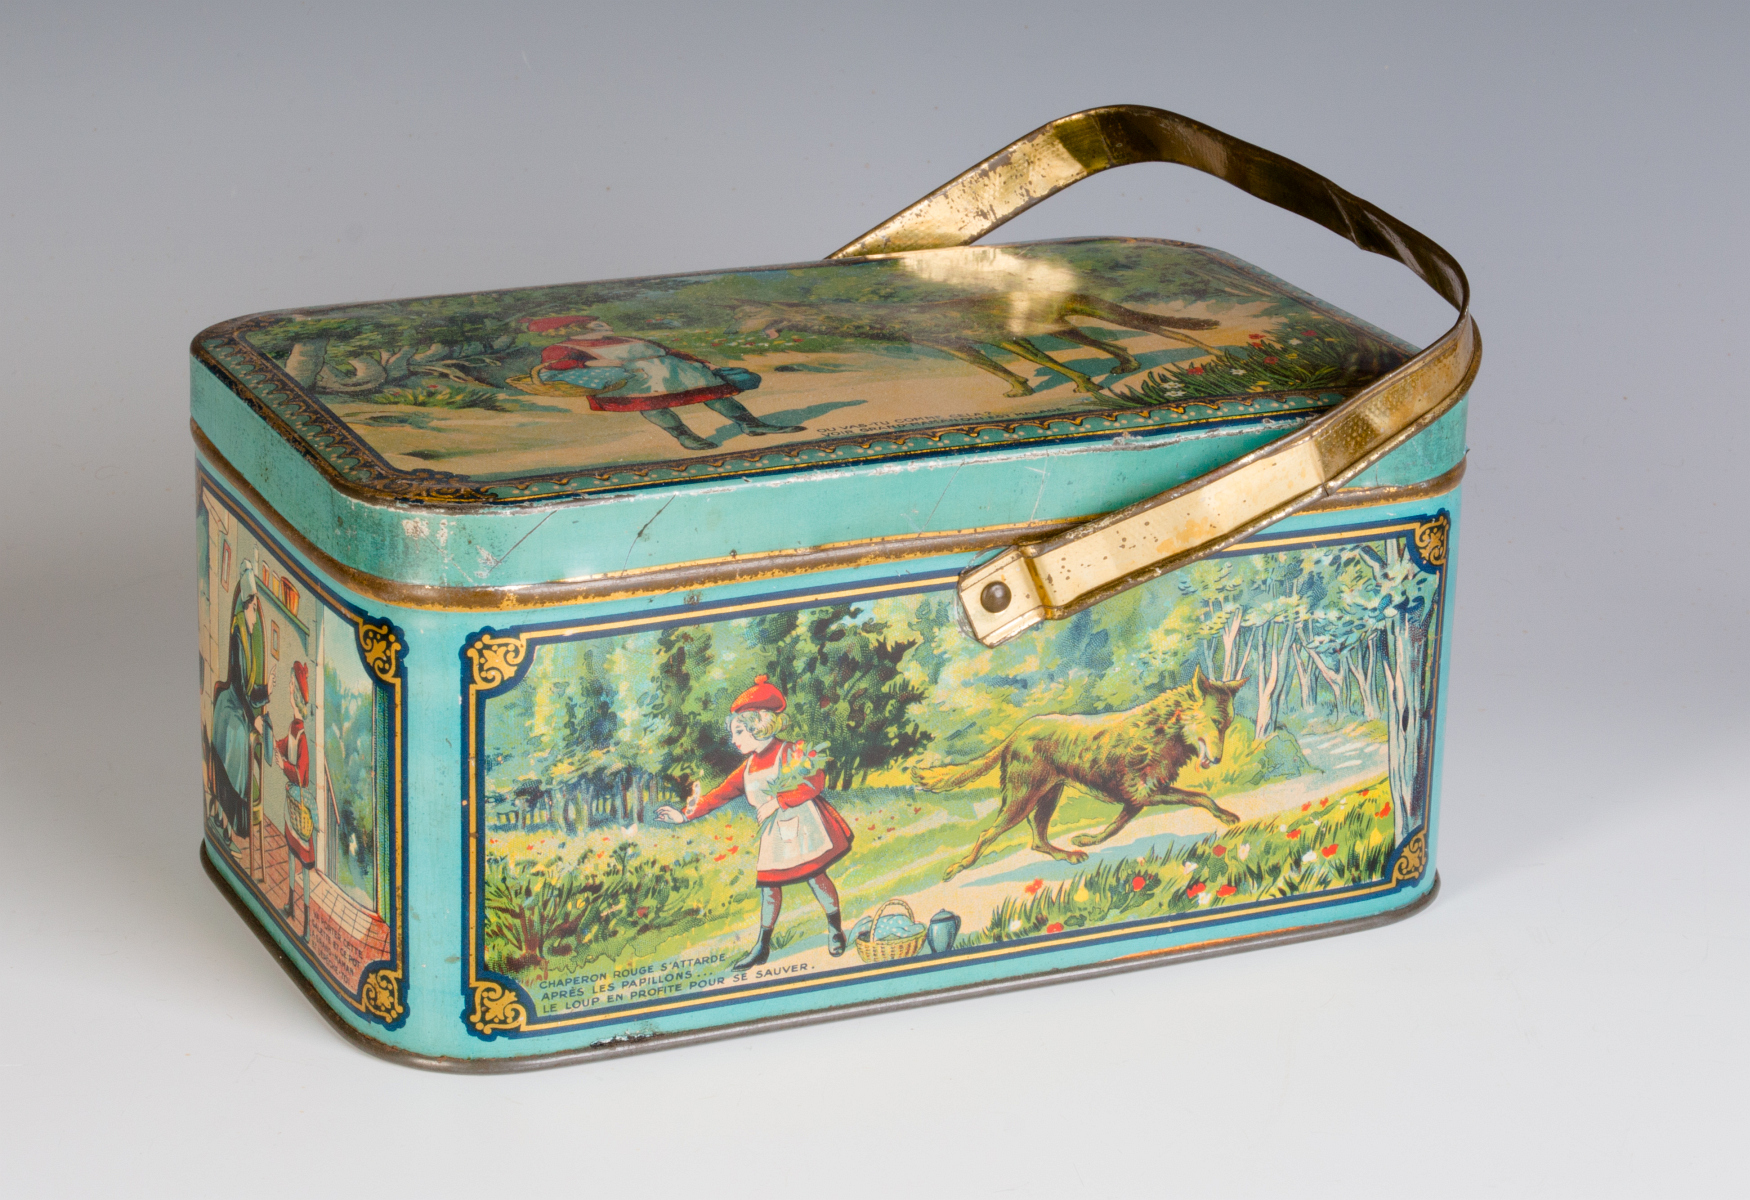 AN ANTIQUE FRENCH TIN LITHO CHILD'S LUNCH TIN